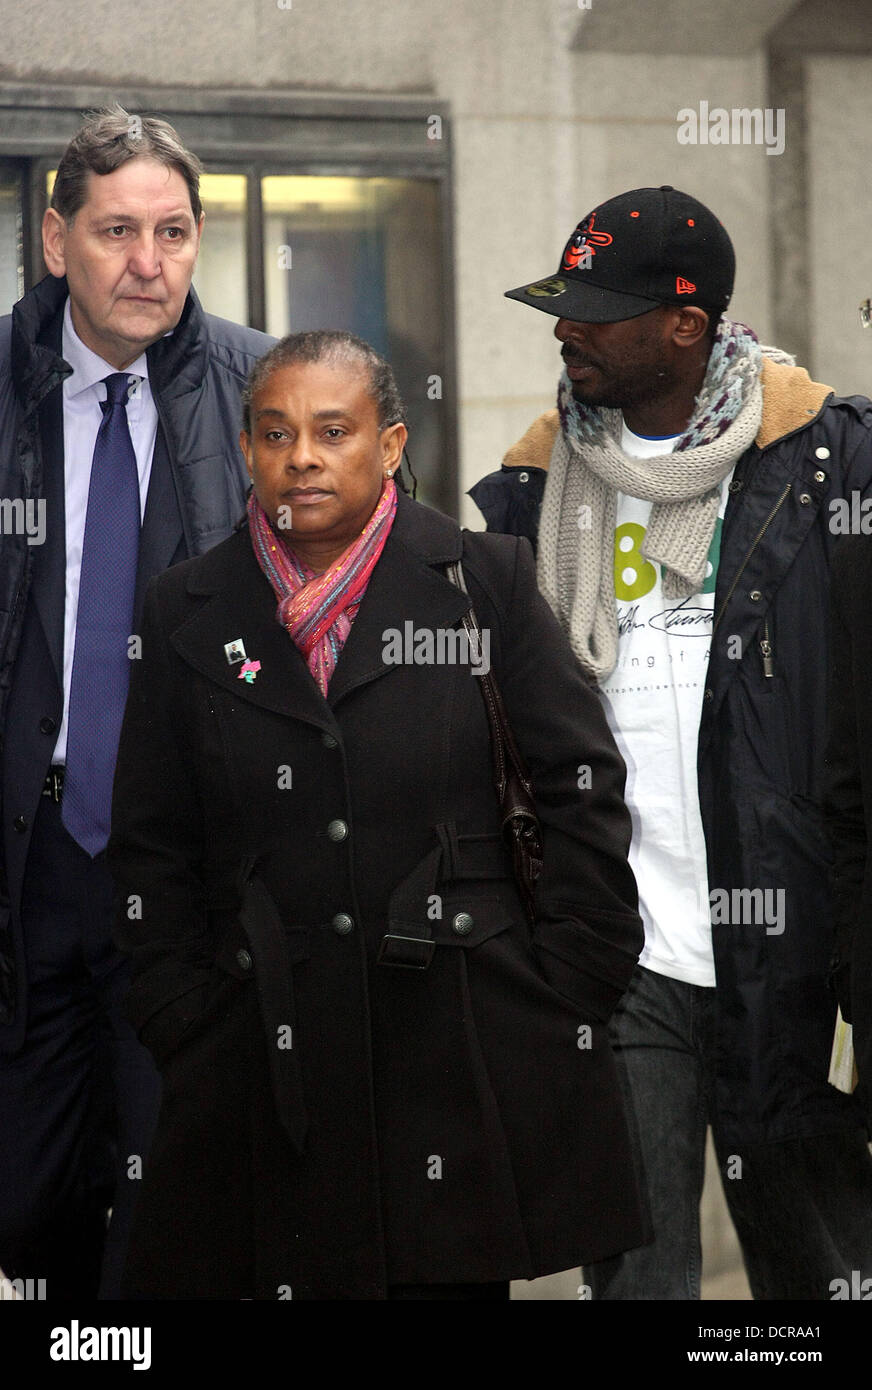 Doreen Lawrence The parents of Stephen Lawrence arrive at the Old Bailey for the start of the trial of Gary Dobson and David Norris for the murder of their son. London, England - 14.11.11 Stock Photo